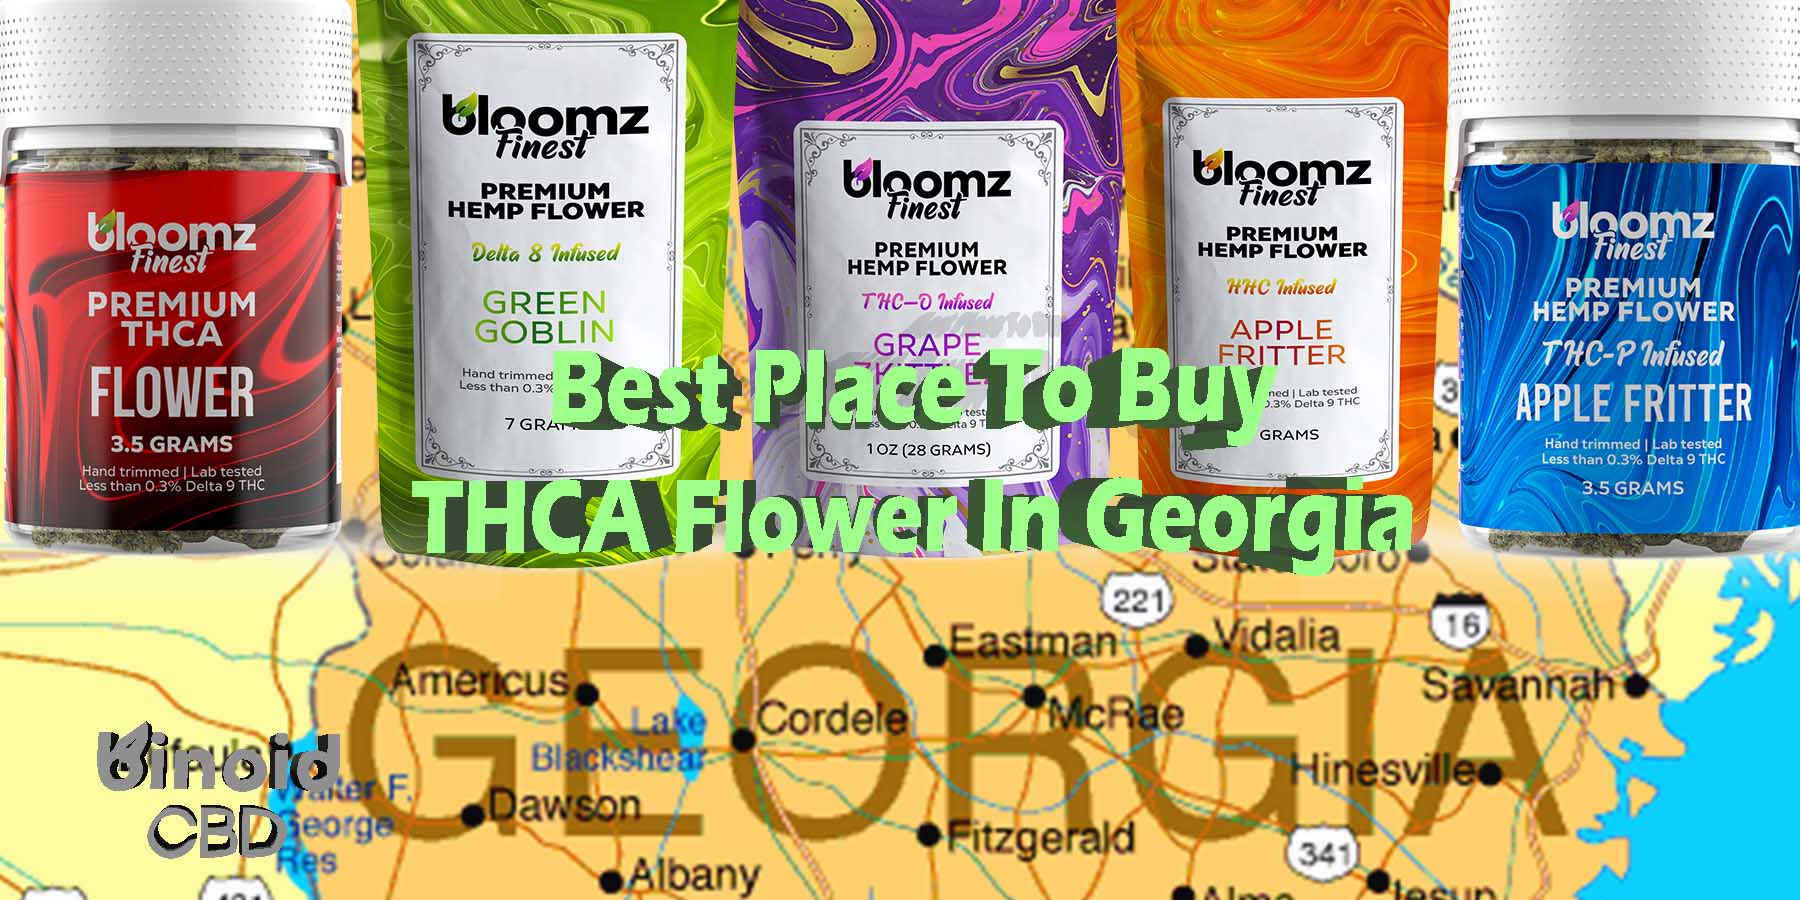 Best Place To Buy THCA Flower In Georgia Pre Rolls Where To Get Near Me Best Place Lowest Price Coupon Discount Strongest Brand Bloomz